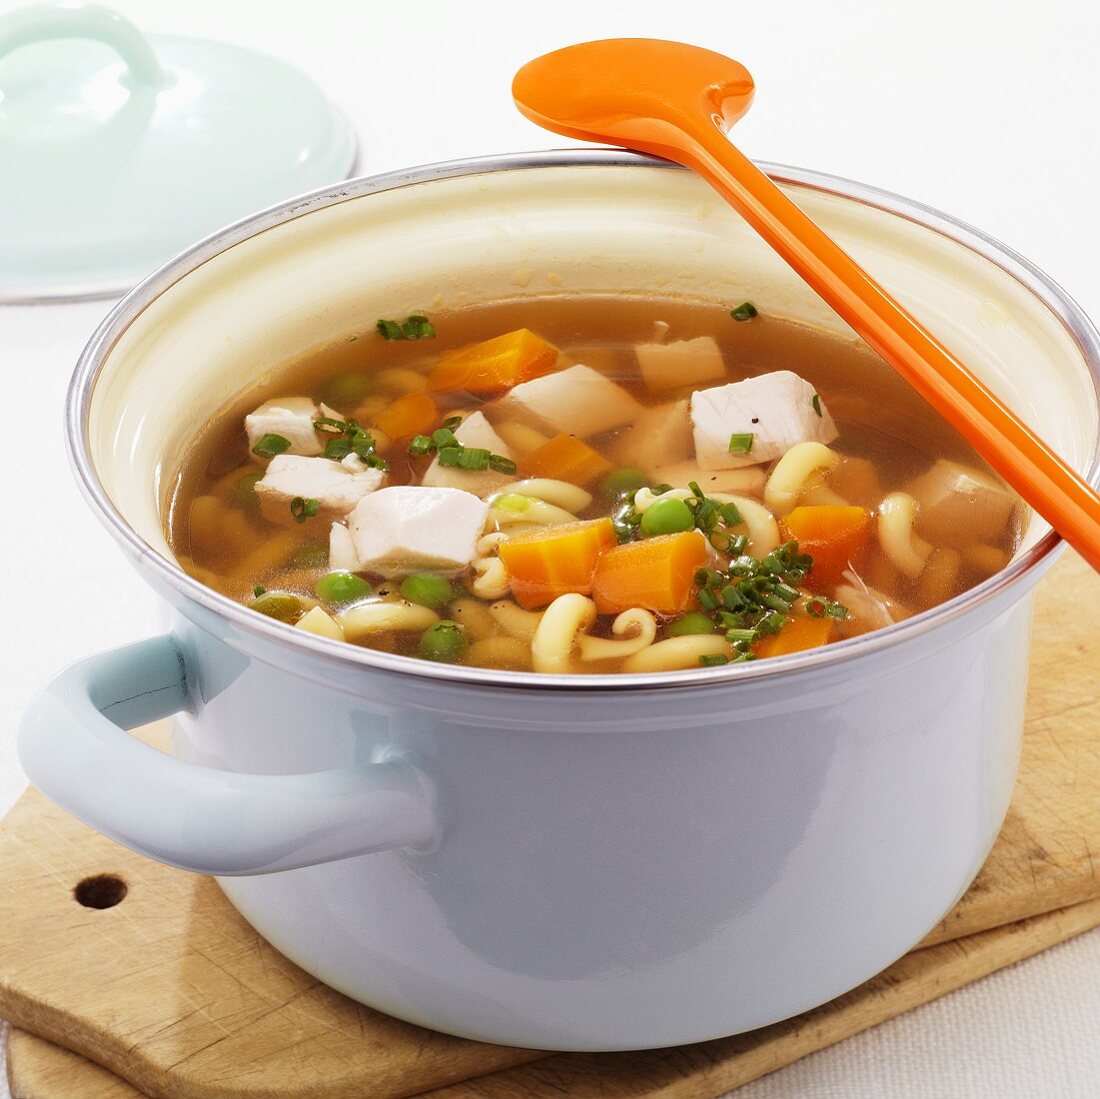 Chicken and pasta soup with vegetables